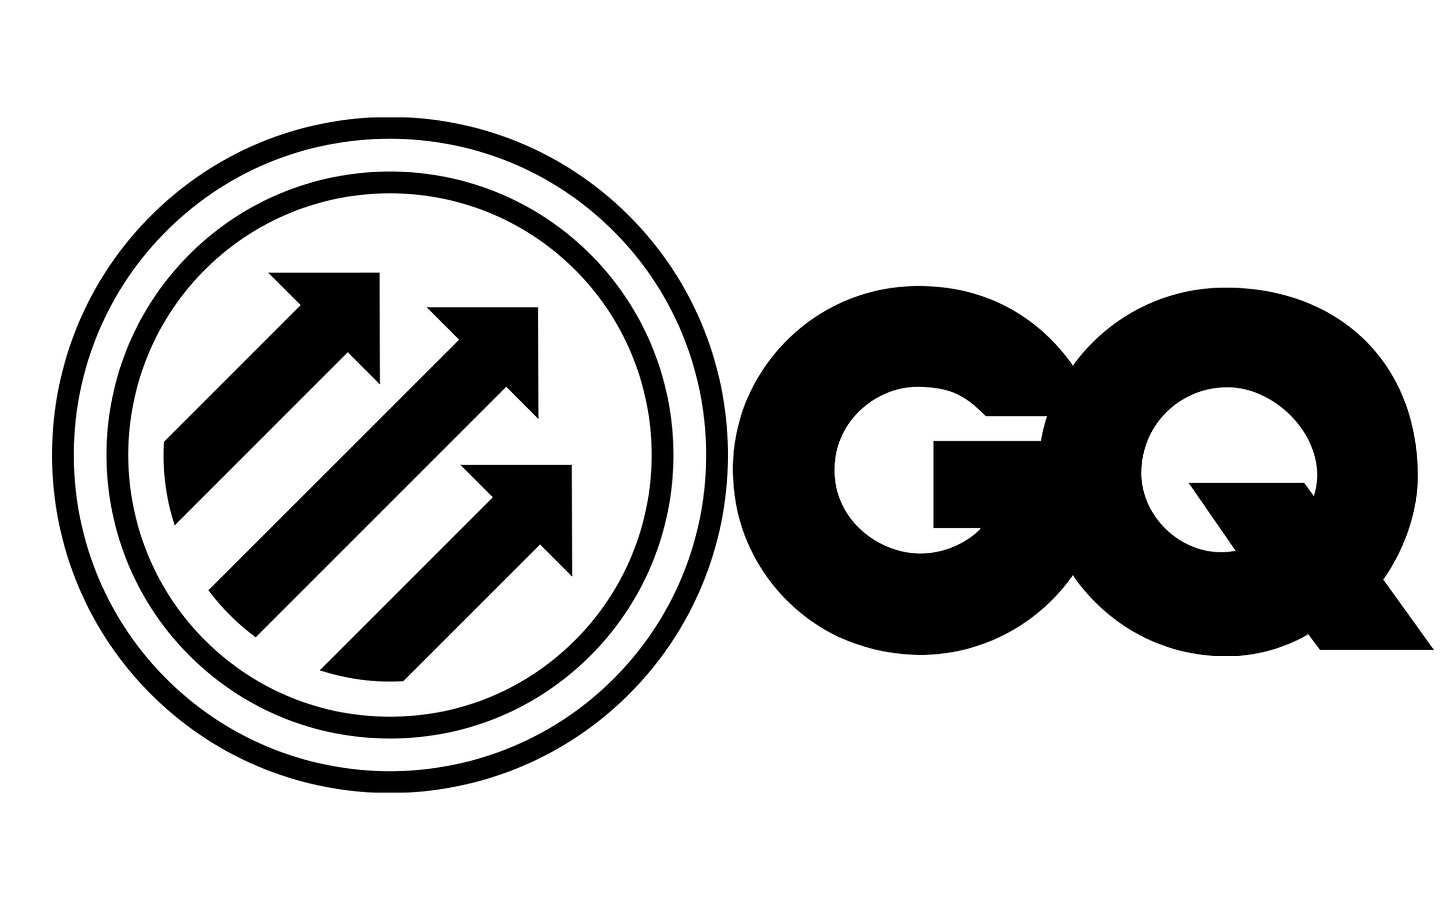 Pitchfork Merges With GQ, Half Their Staff Laid Off